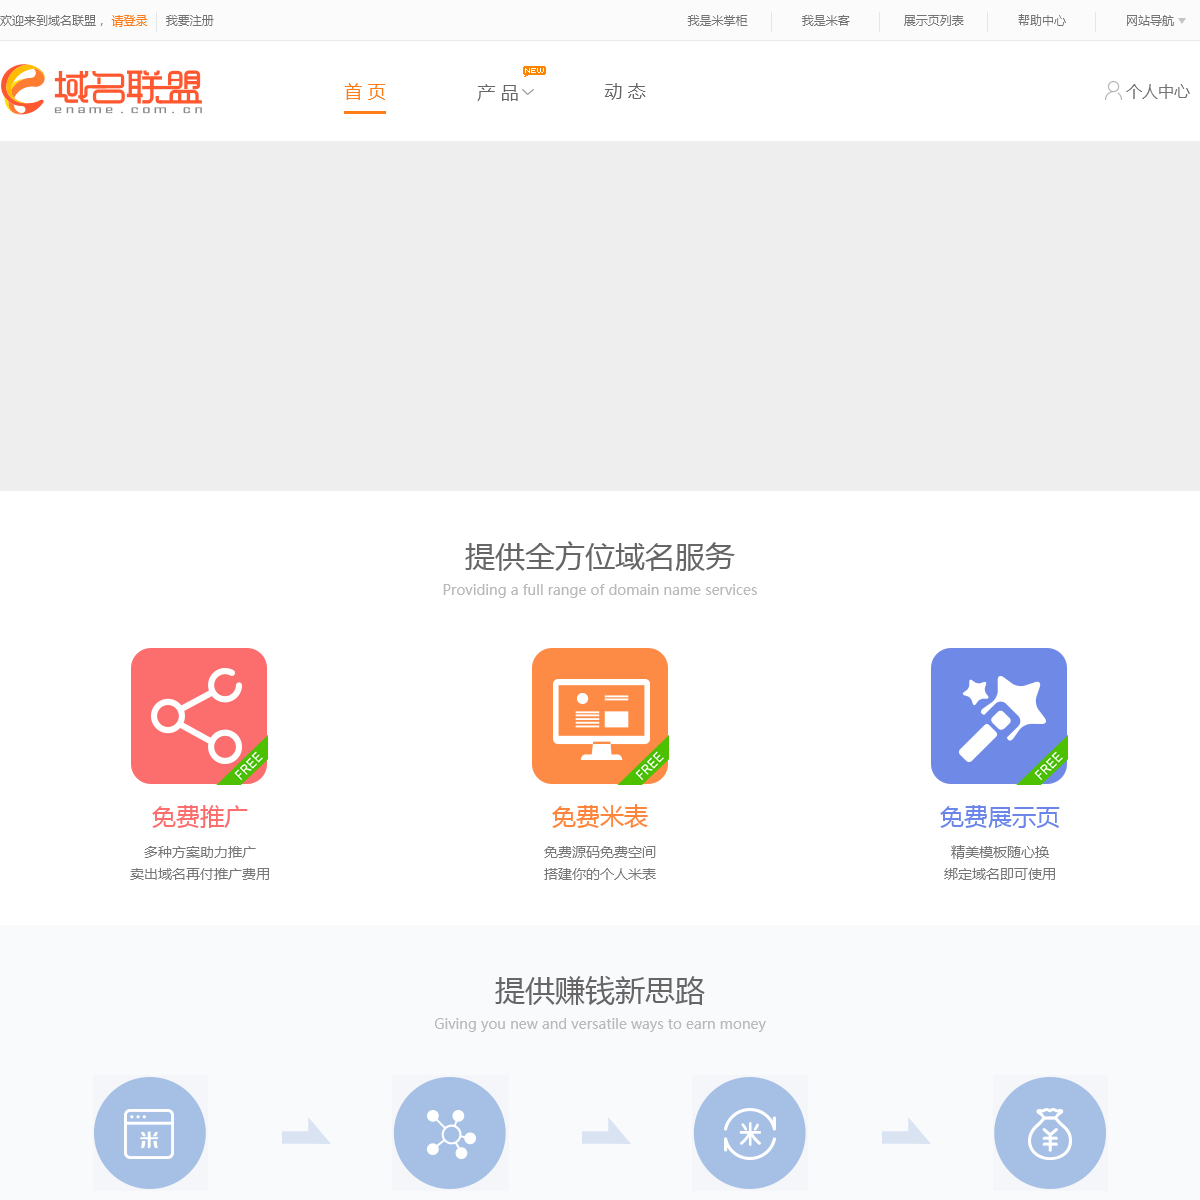 A complete backup of ename.com.cn